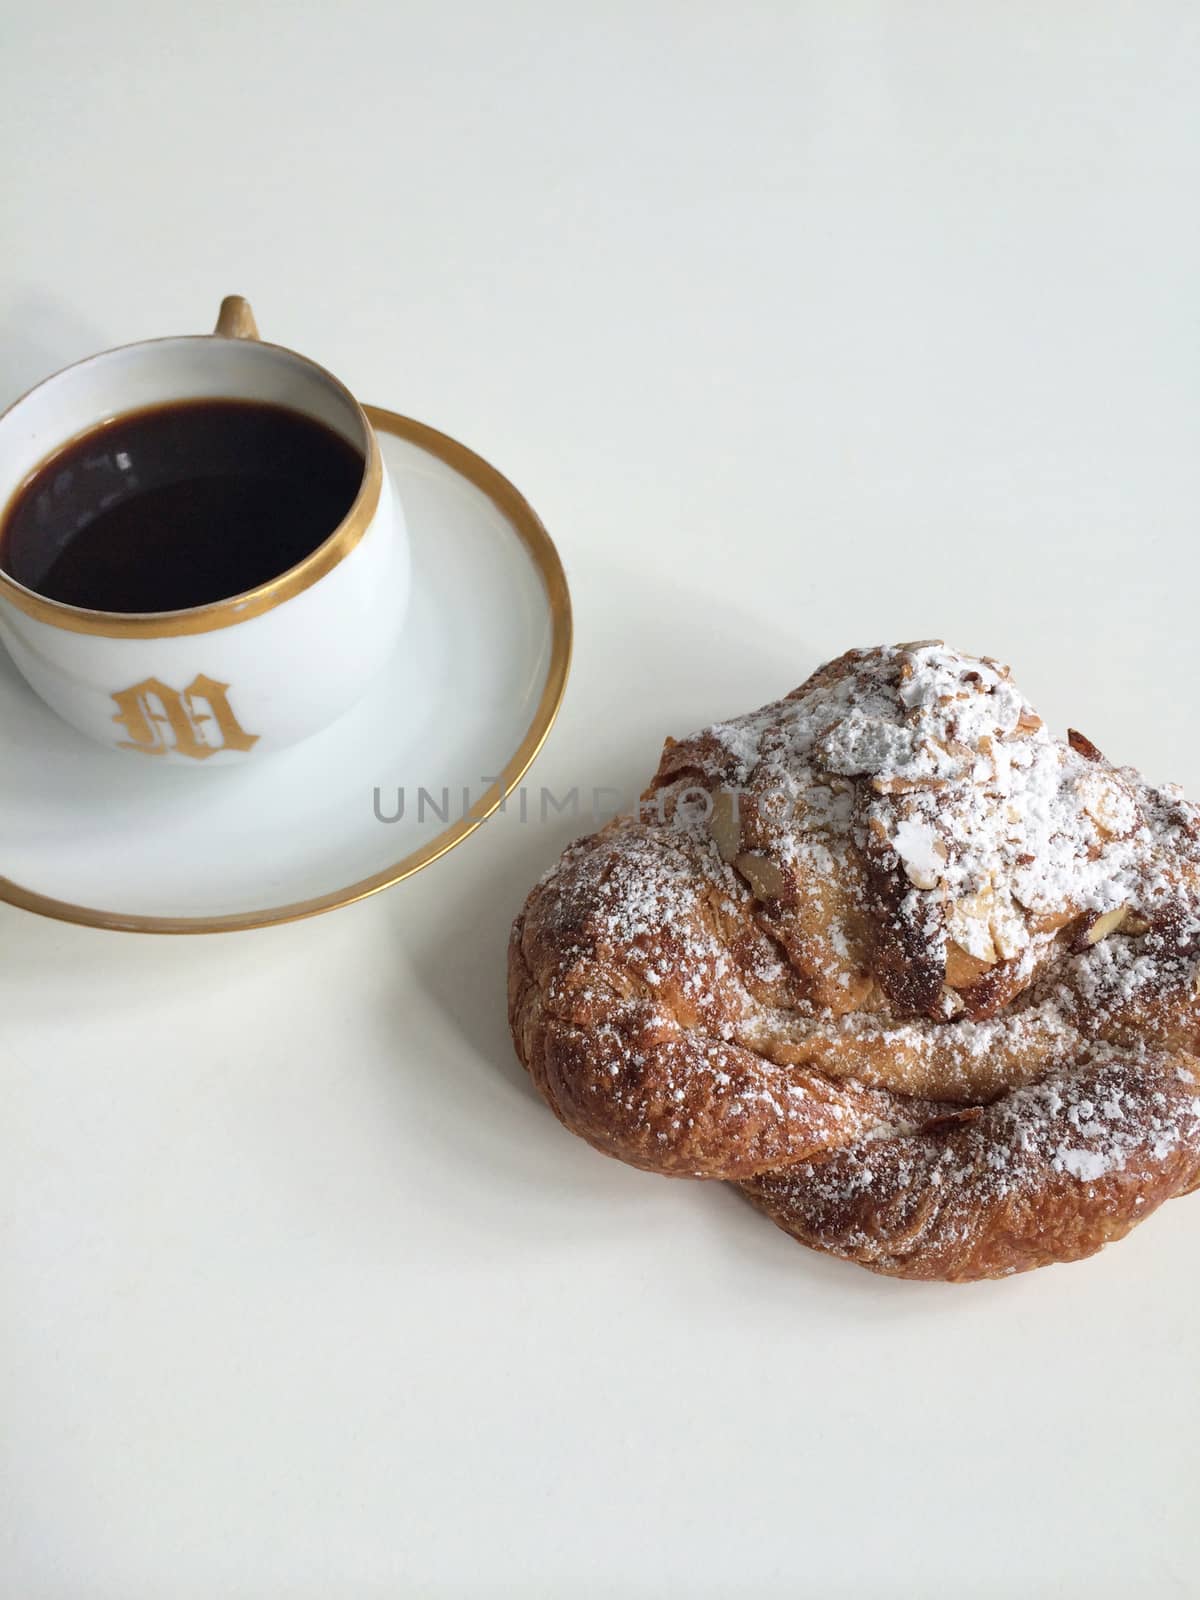 Amond croissant and black coffee by mmm